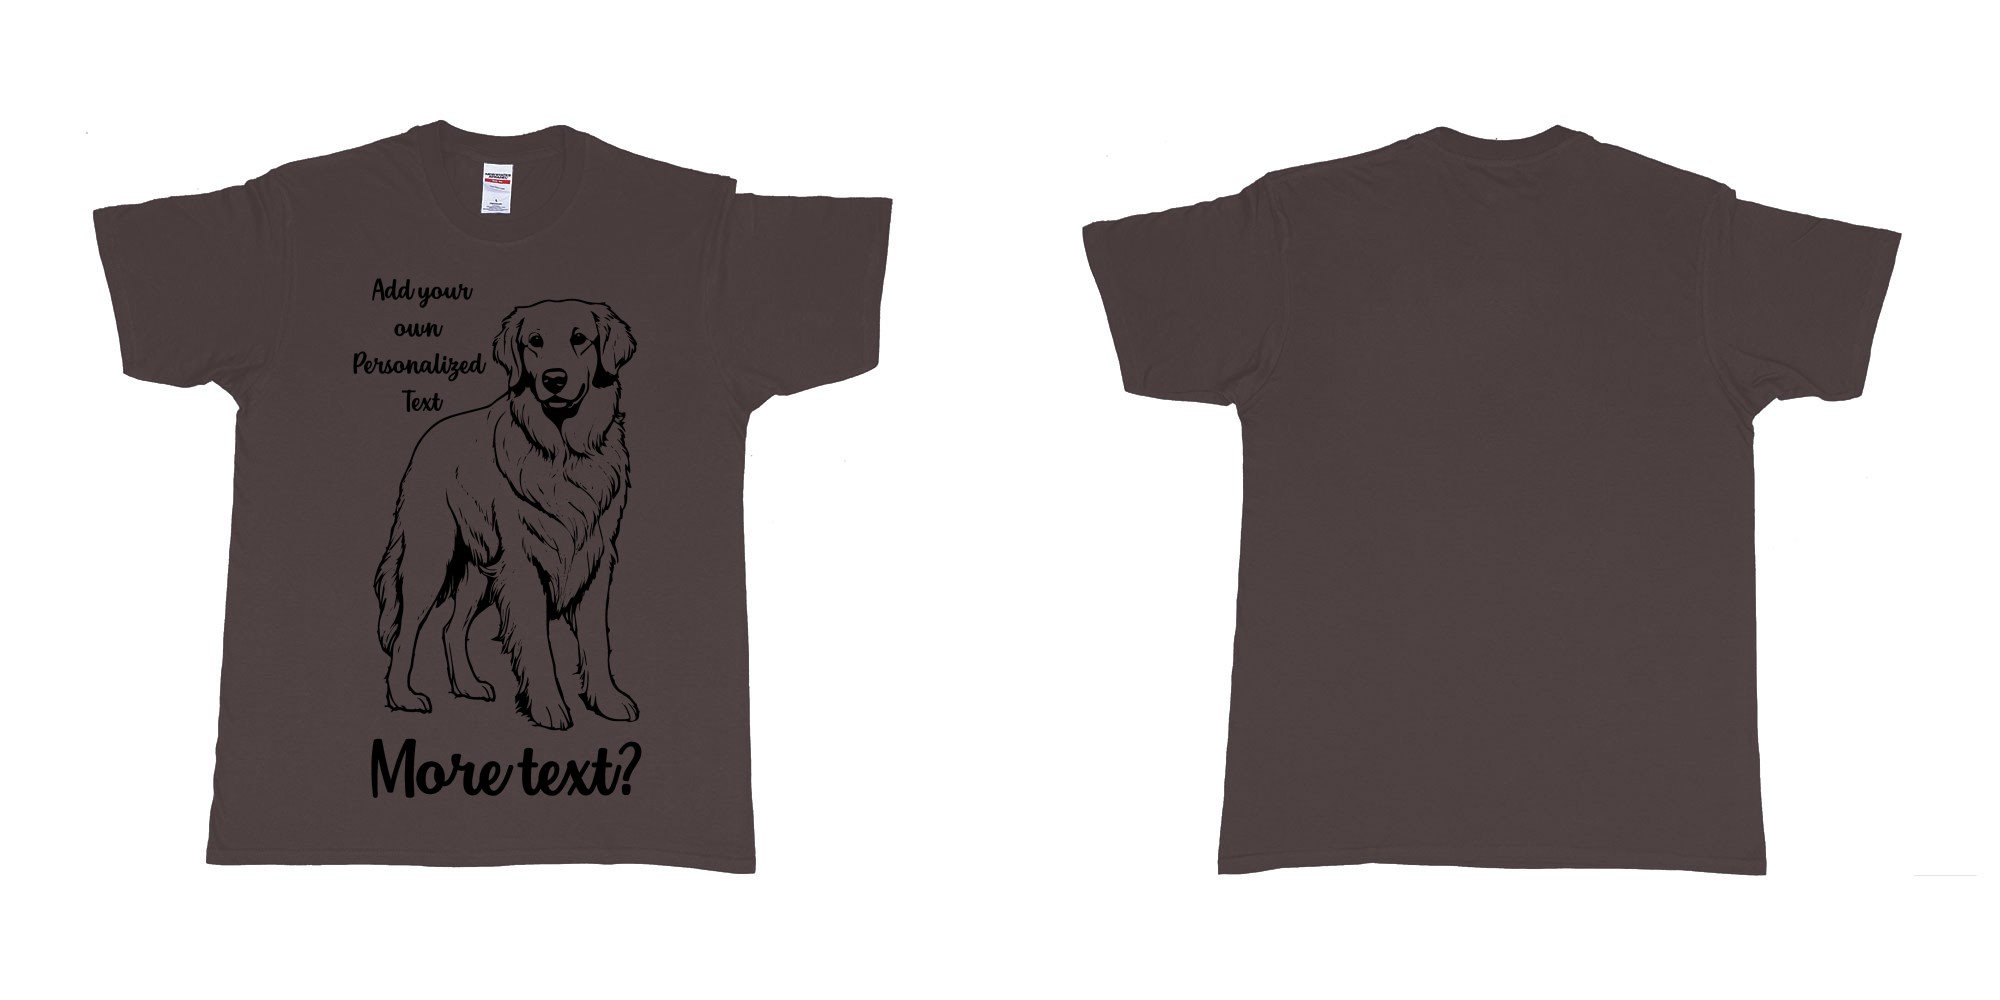 Custom tshirt design golden retriever dog breed personalized text in fabric color dark-chocolate choice your own text made in Bali by The Pirate Way